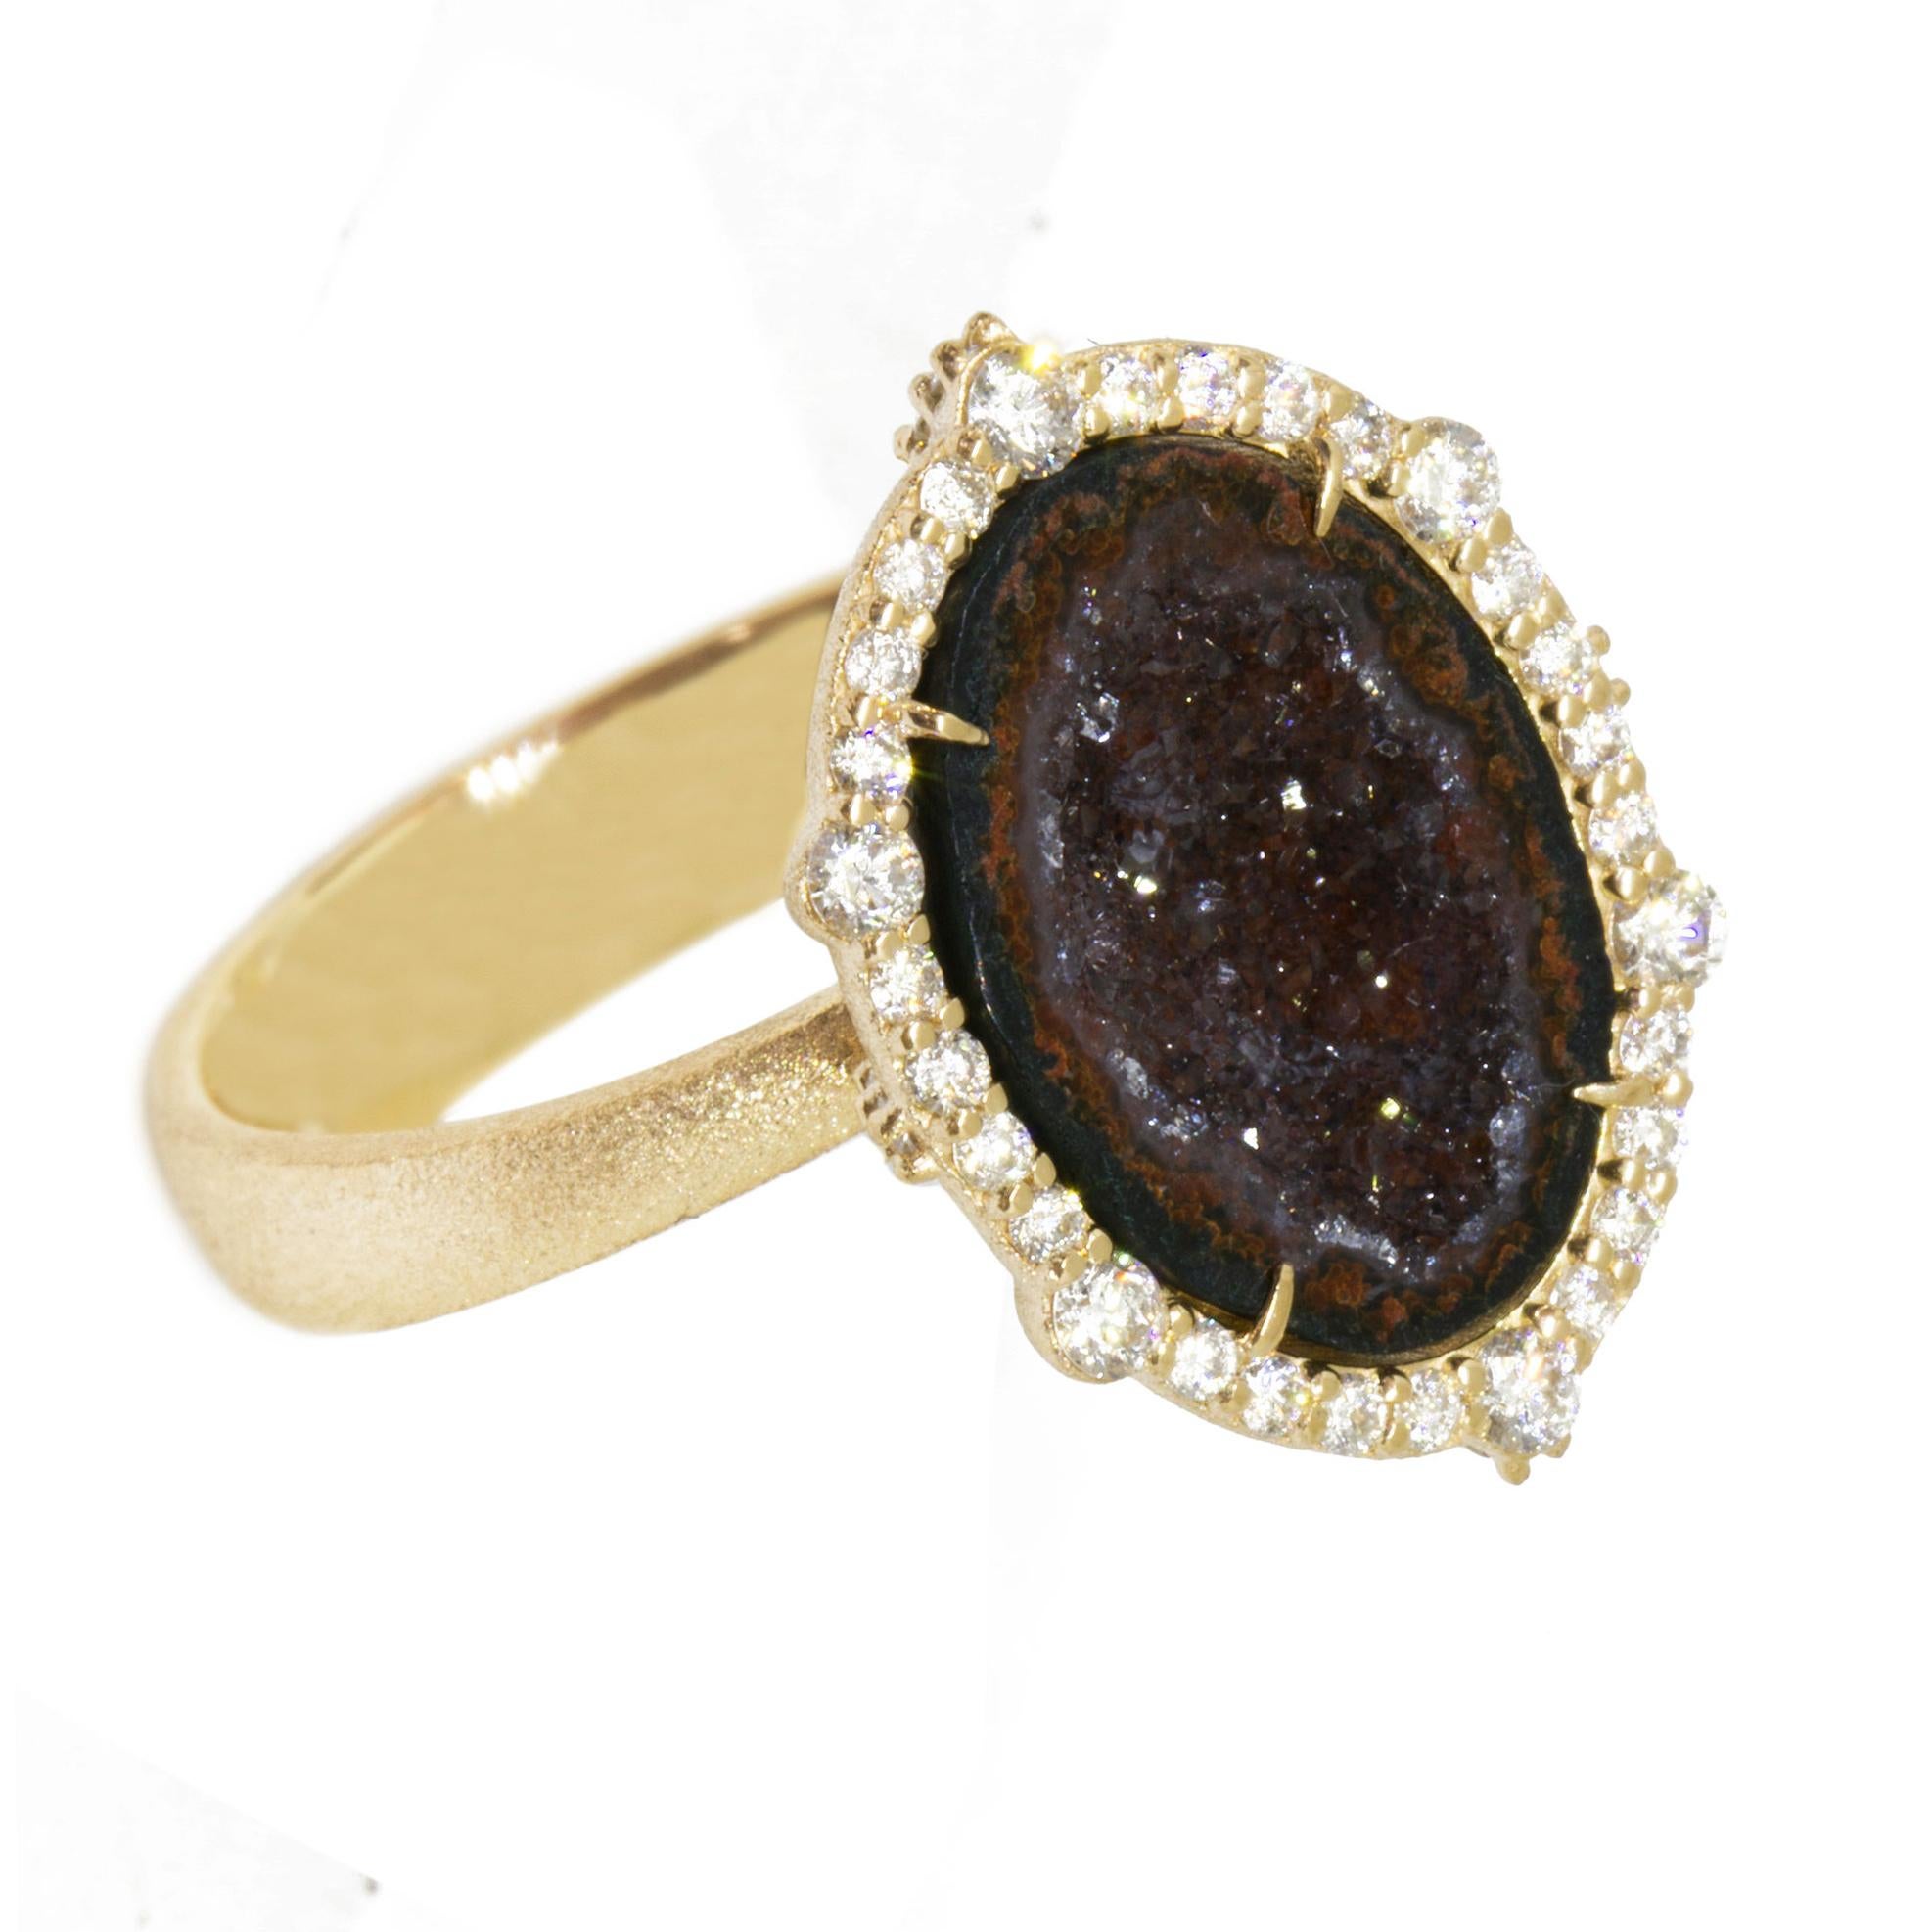 Earthy and unique, our one-of-a-kind geode ring adorned with vivid diamonds is a true delight. Eclectic and classy, The Geode Ring will diversify your style in an instant. 
We stock only size 7 and will resize for you with no additional charge.